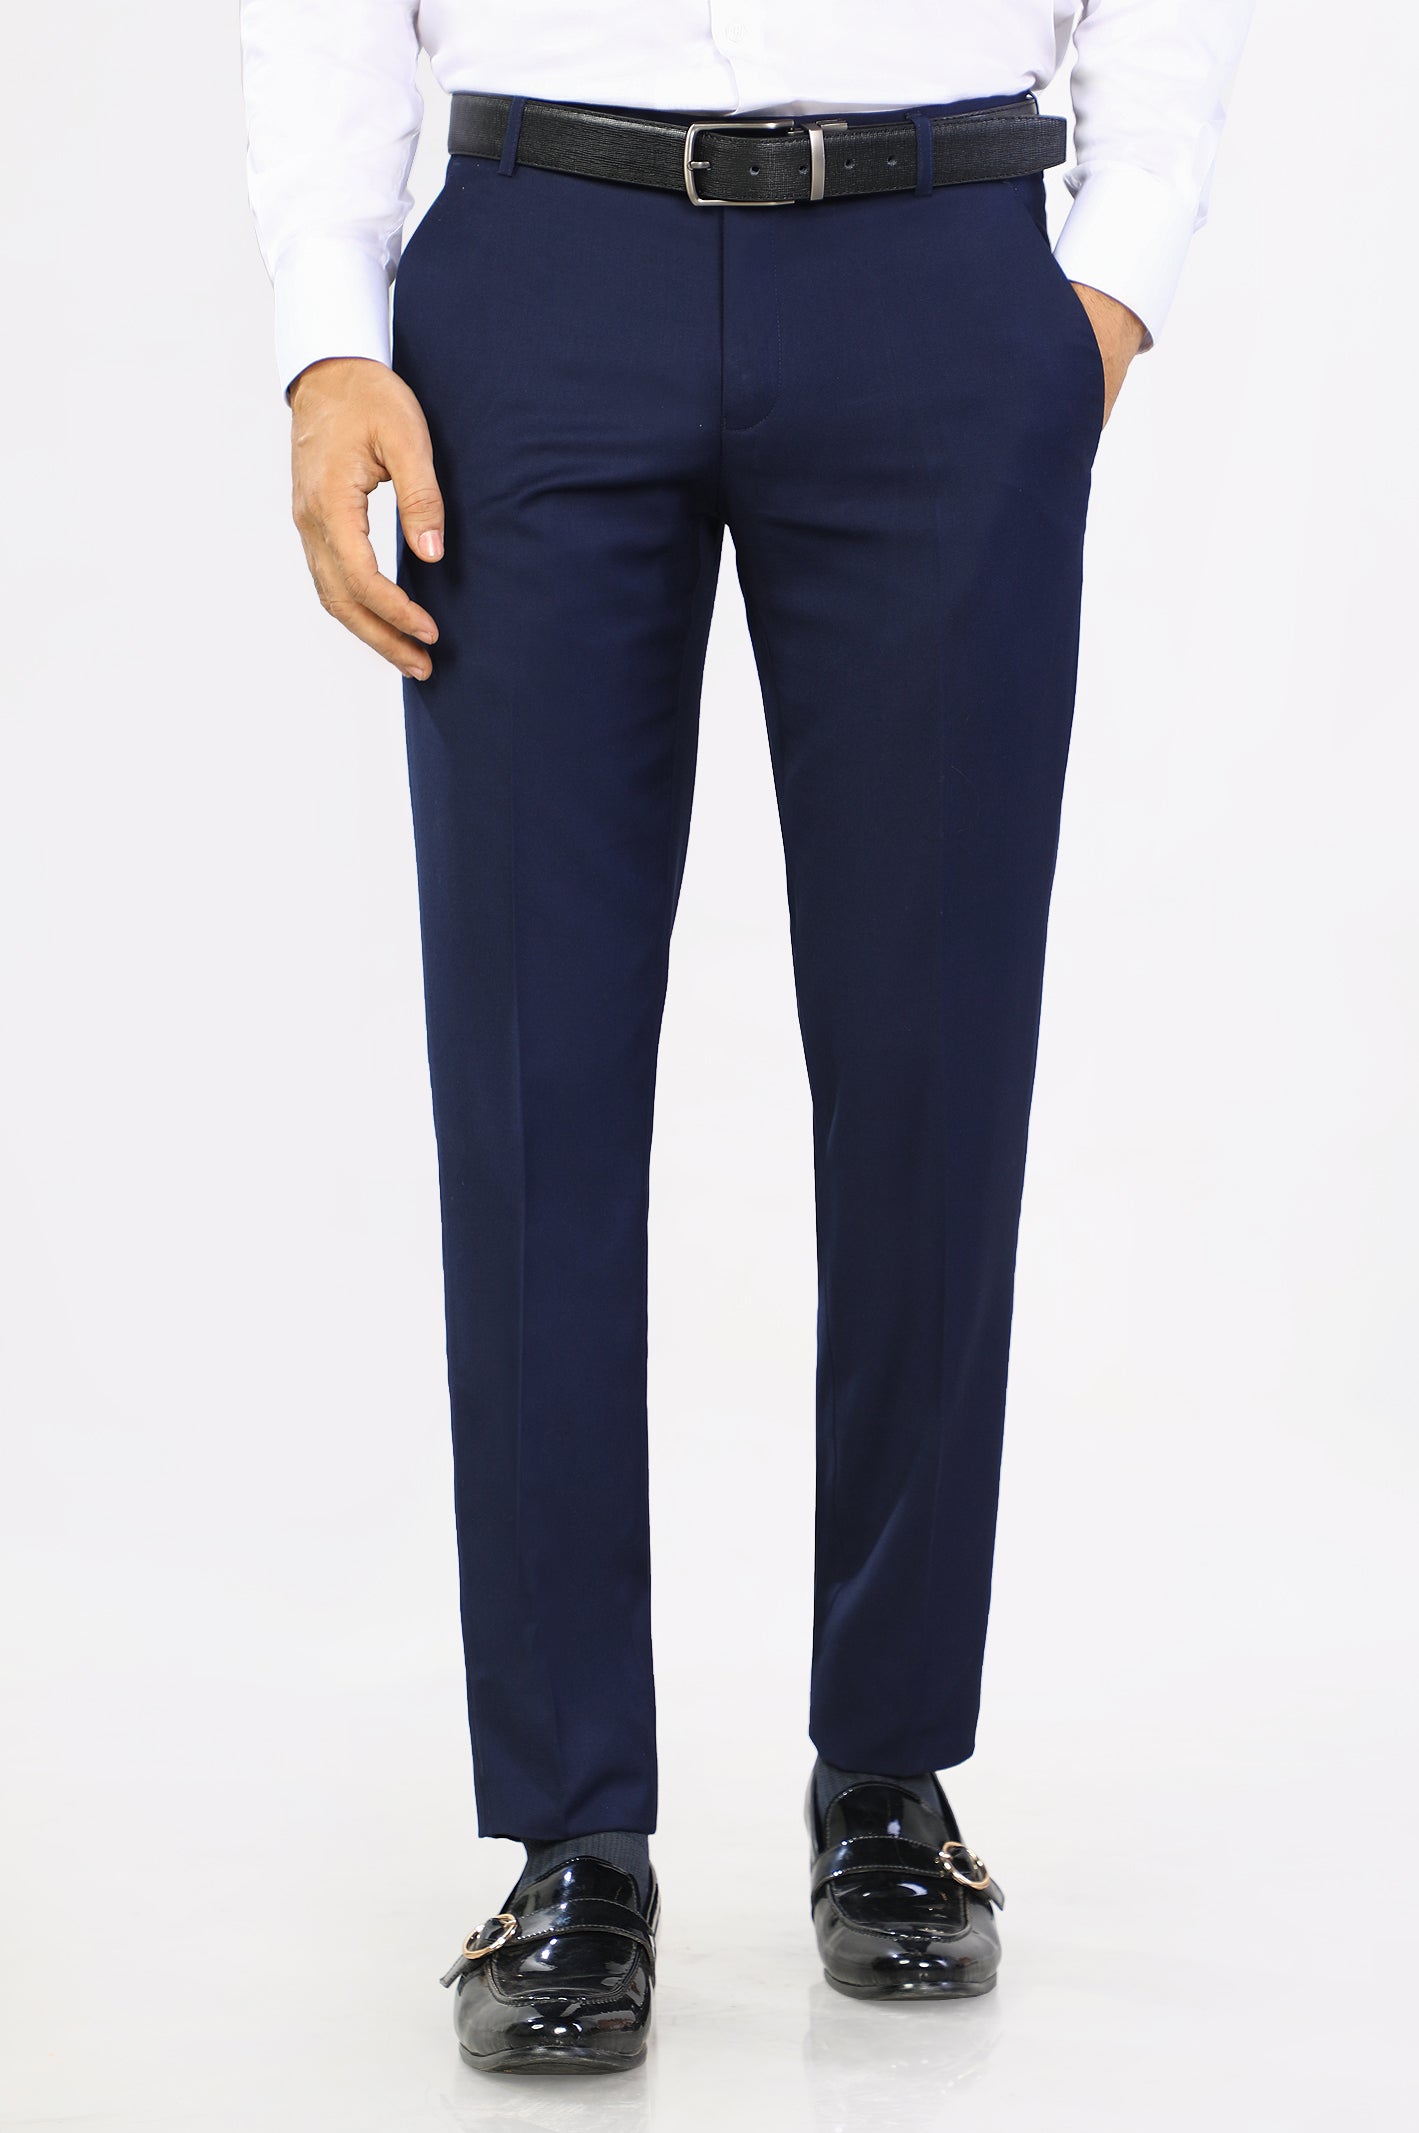 Formal Trouser For Men From Diners